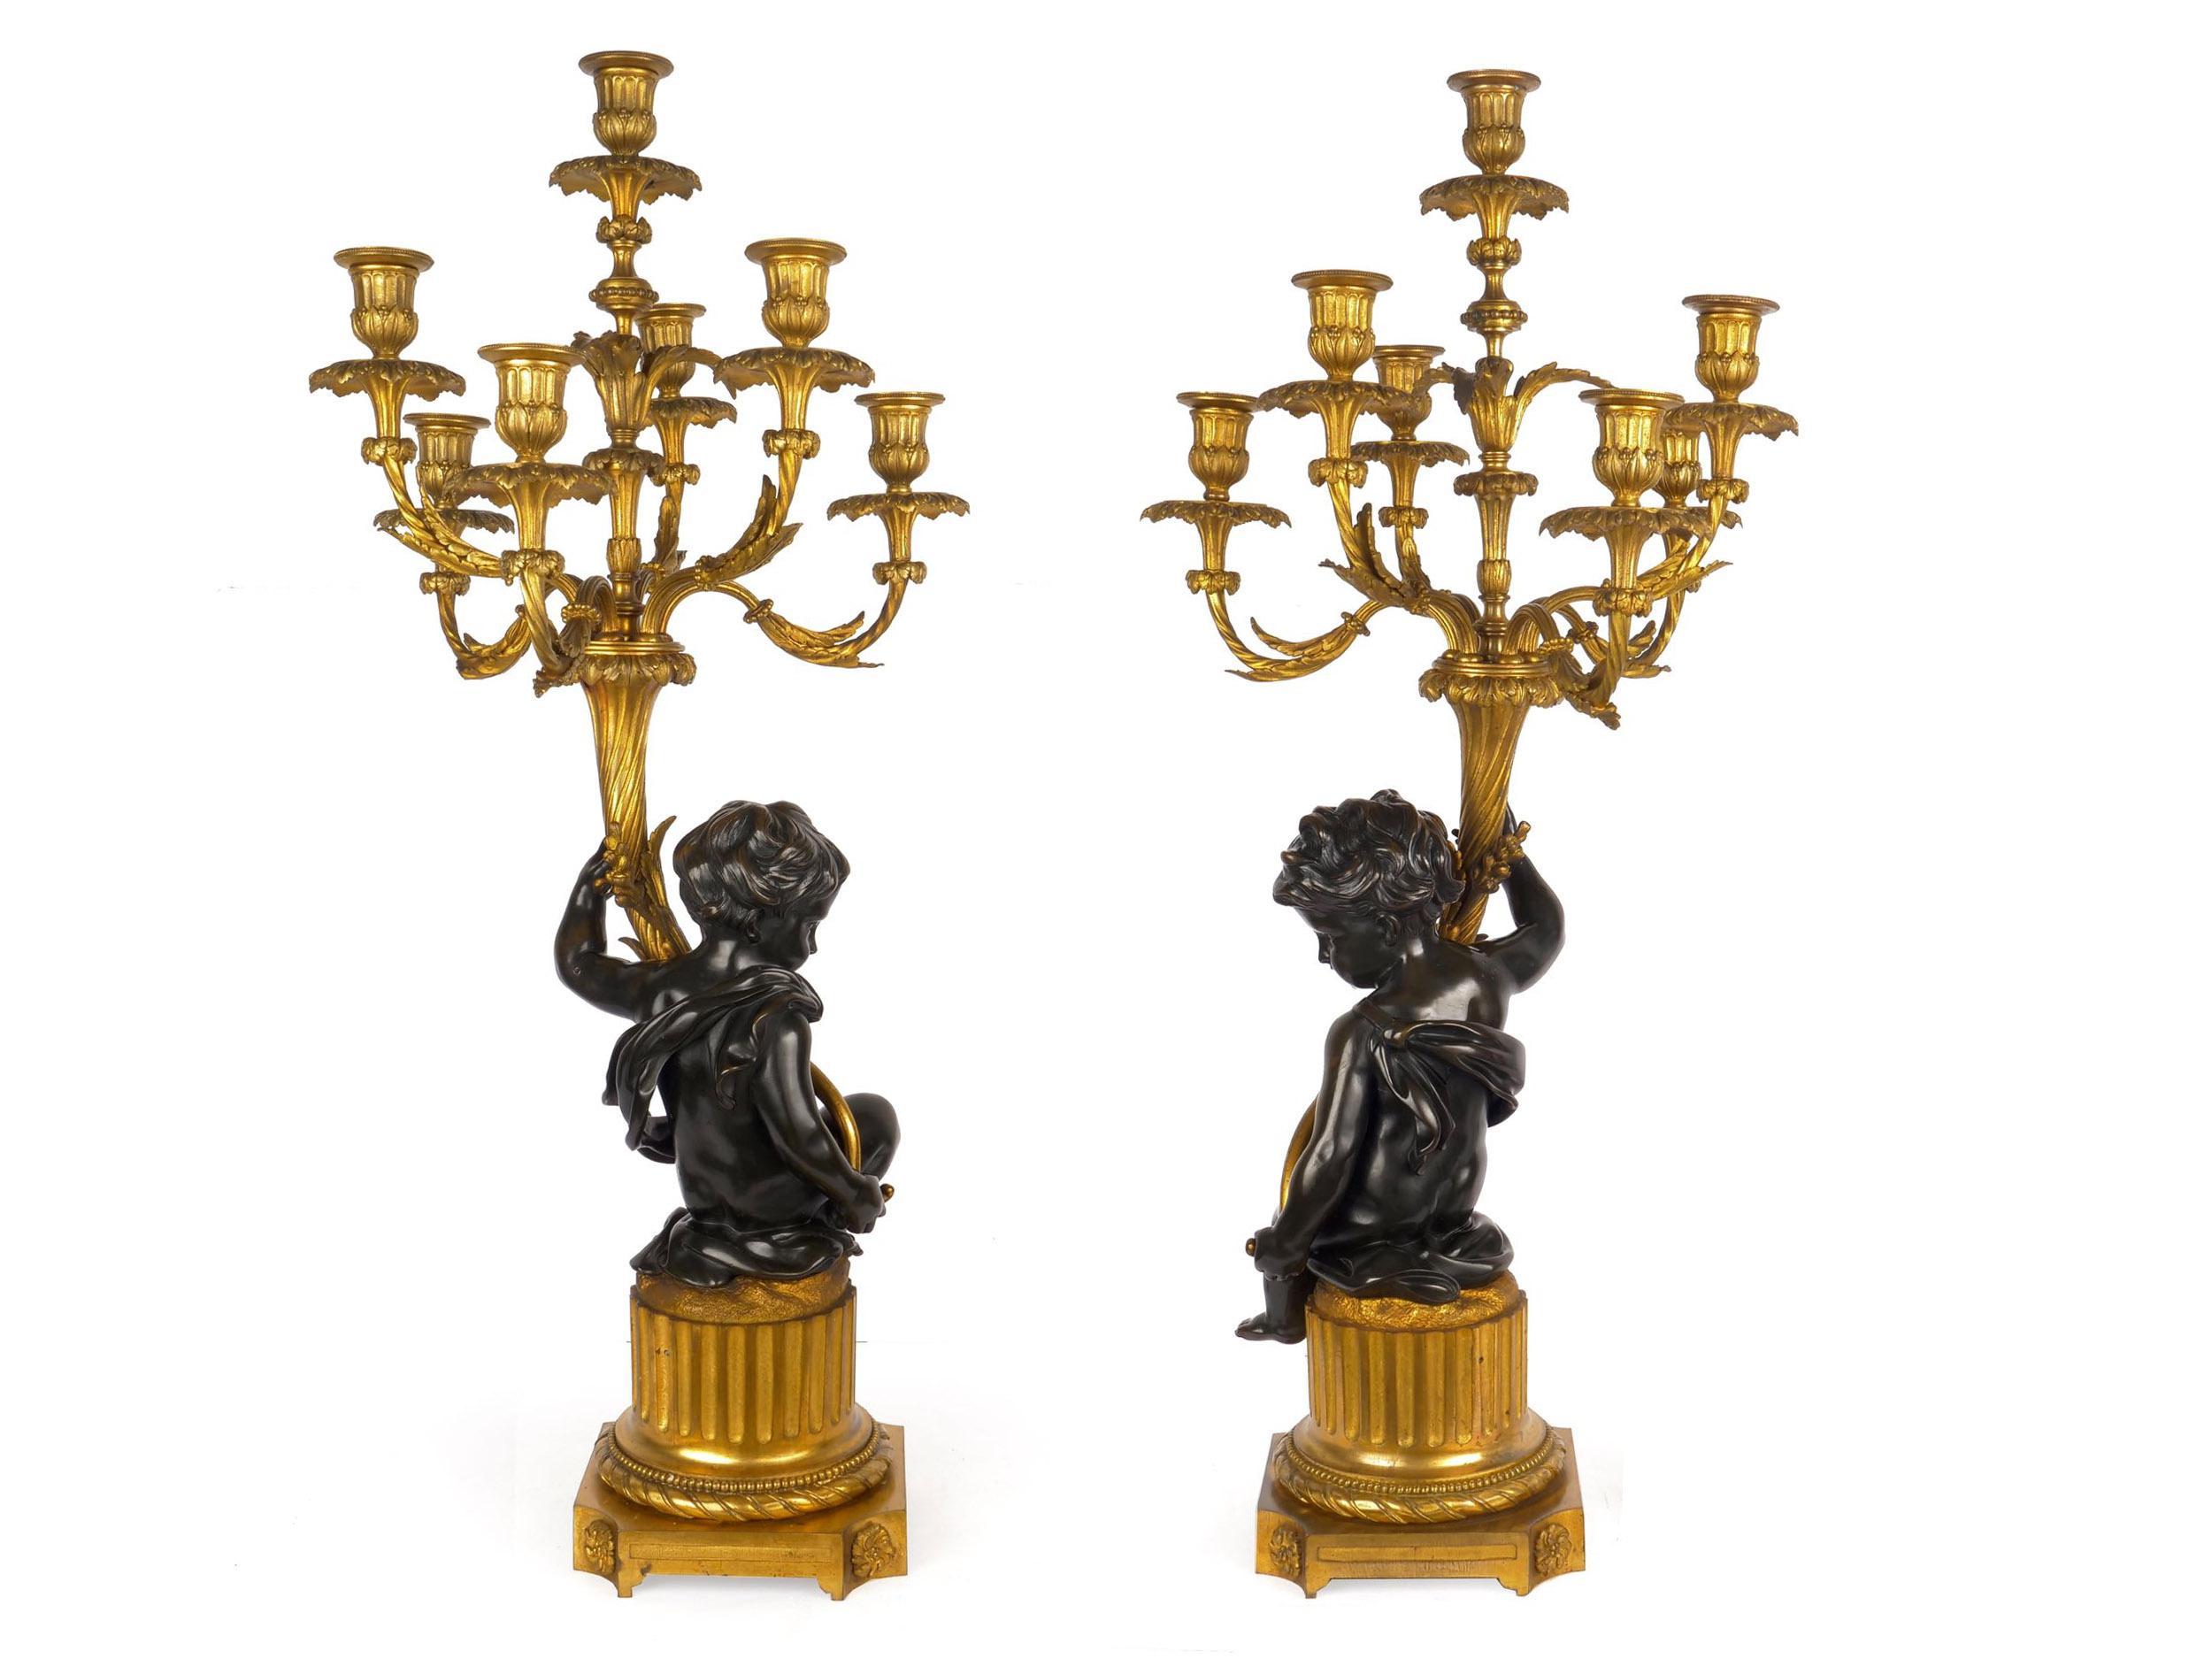 SUPERB PAIR OF DORÉ AND PATINATED BRONZE SEVEN-LIGHT CANDELABRA WITH PUTTO FIGURALS
France, circa 1870-1890
Item # 007LTX30A 

An incredibly fine pair of seven-light doré and patinated bronze candelabra, both feature putto figurals with seated